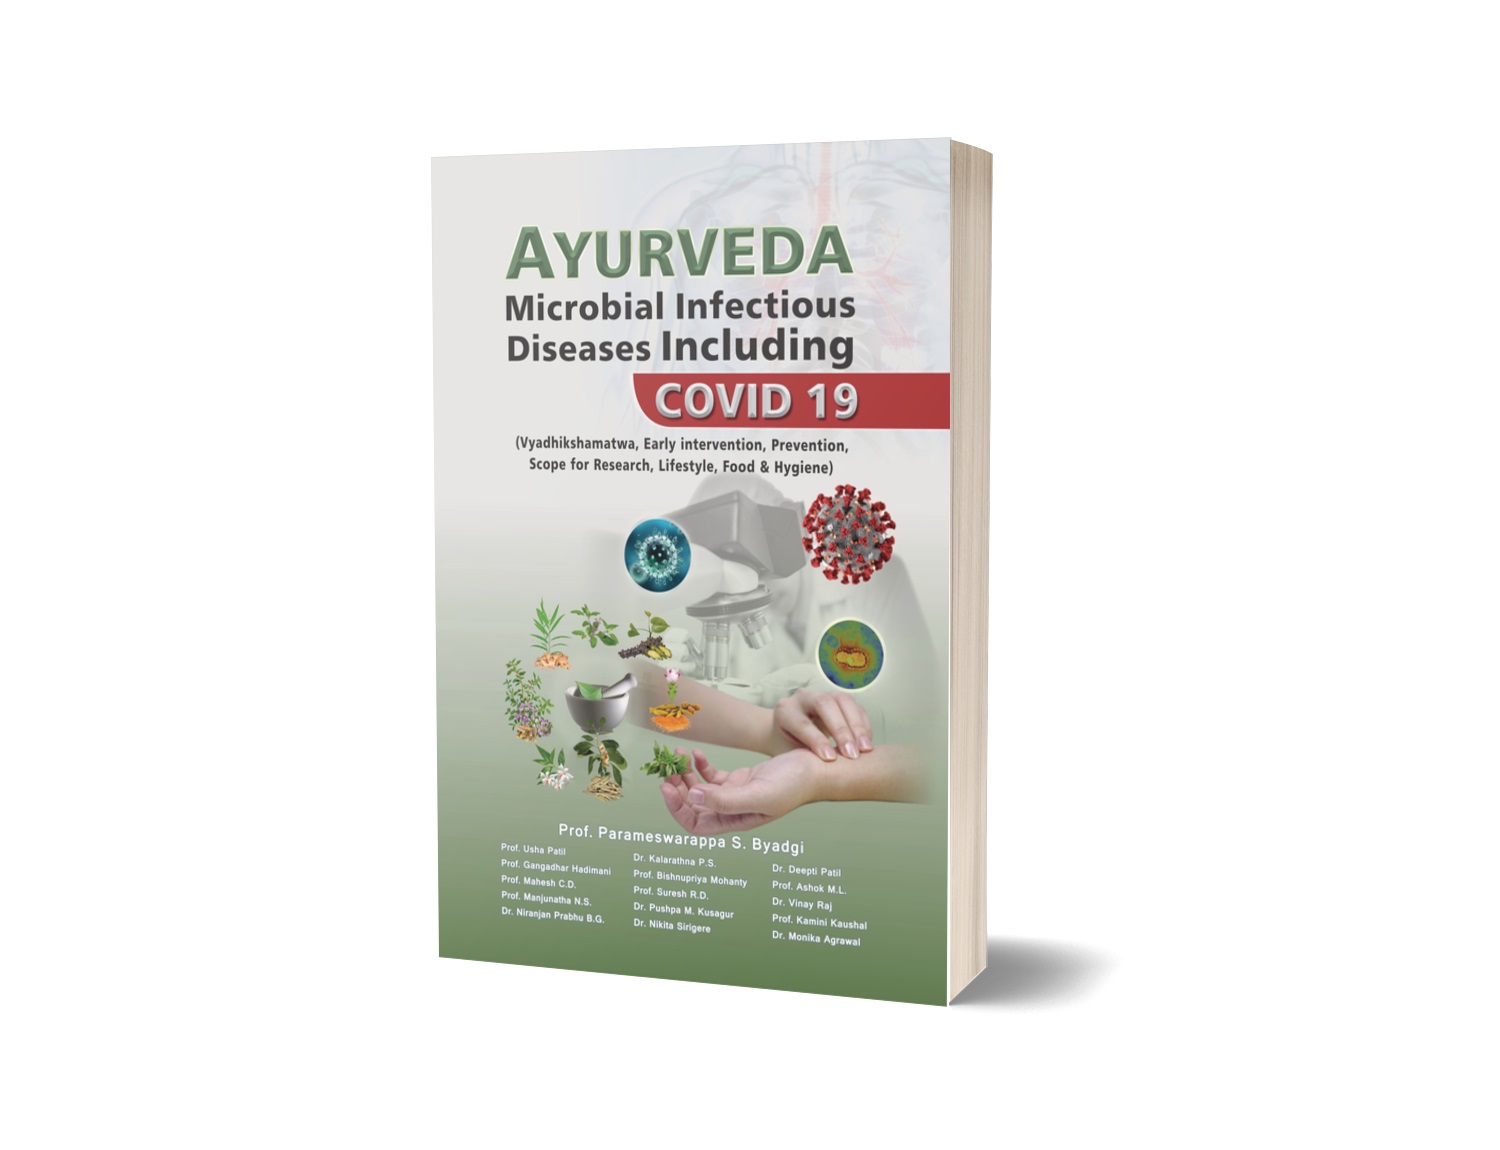 Ayurveda Microbial Infectious Diseases Including Covid 19 (Vyadhikshamatwa, Early intervention, prevention, scope for research, Lifestyle, Food & Hygiene)